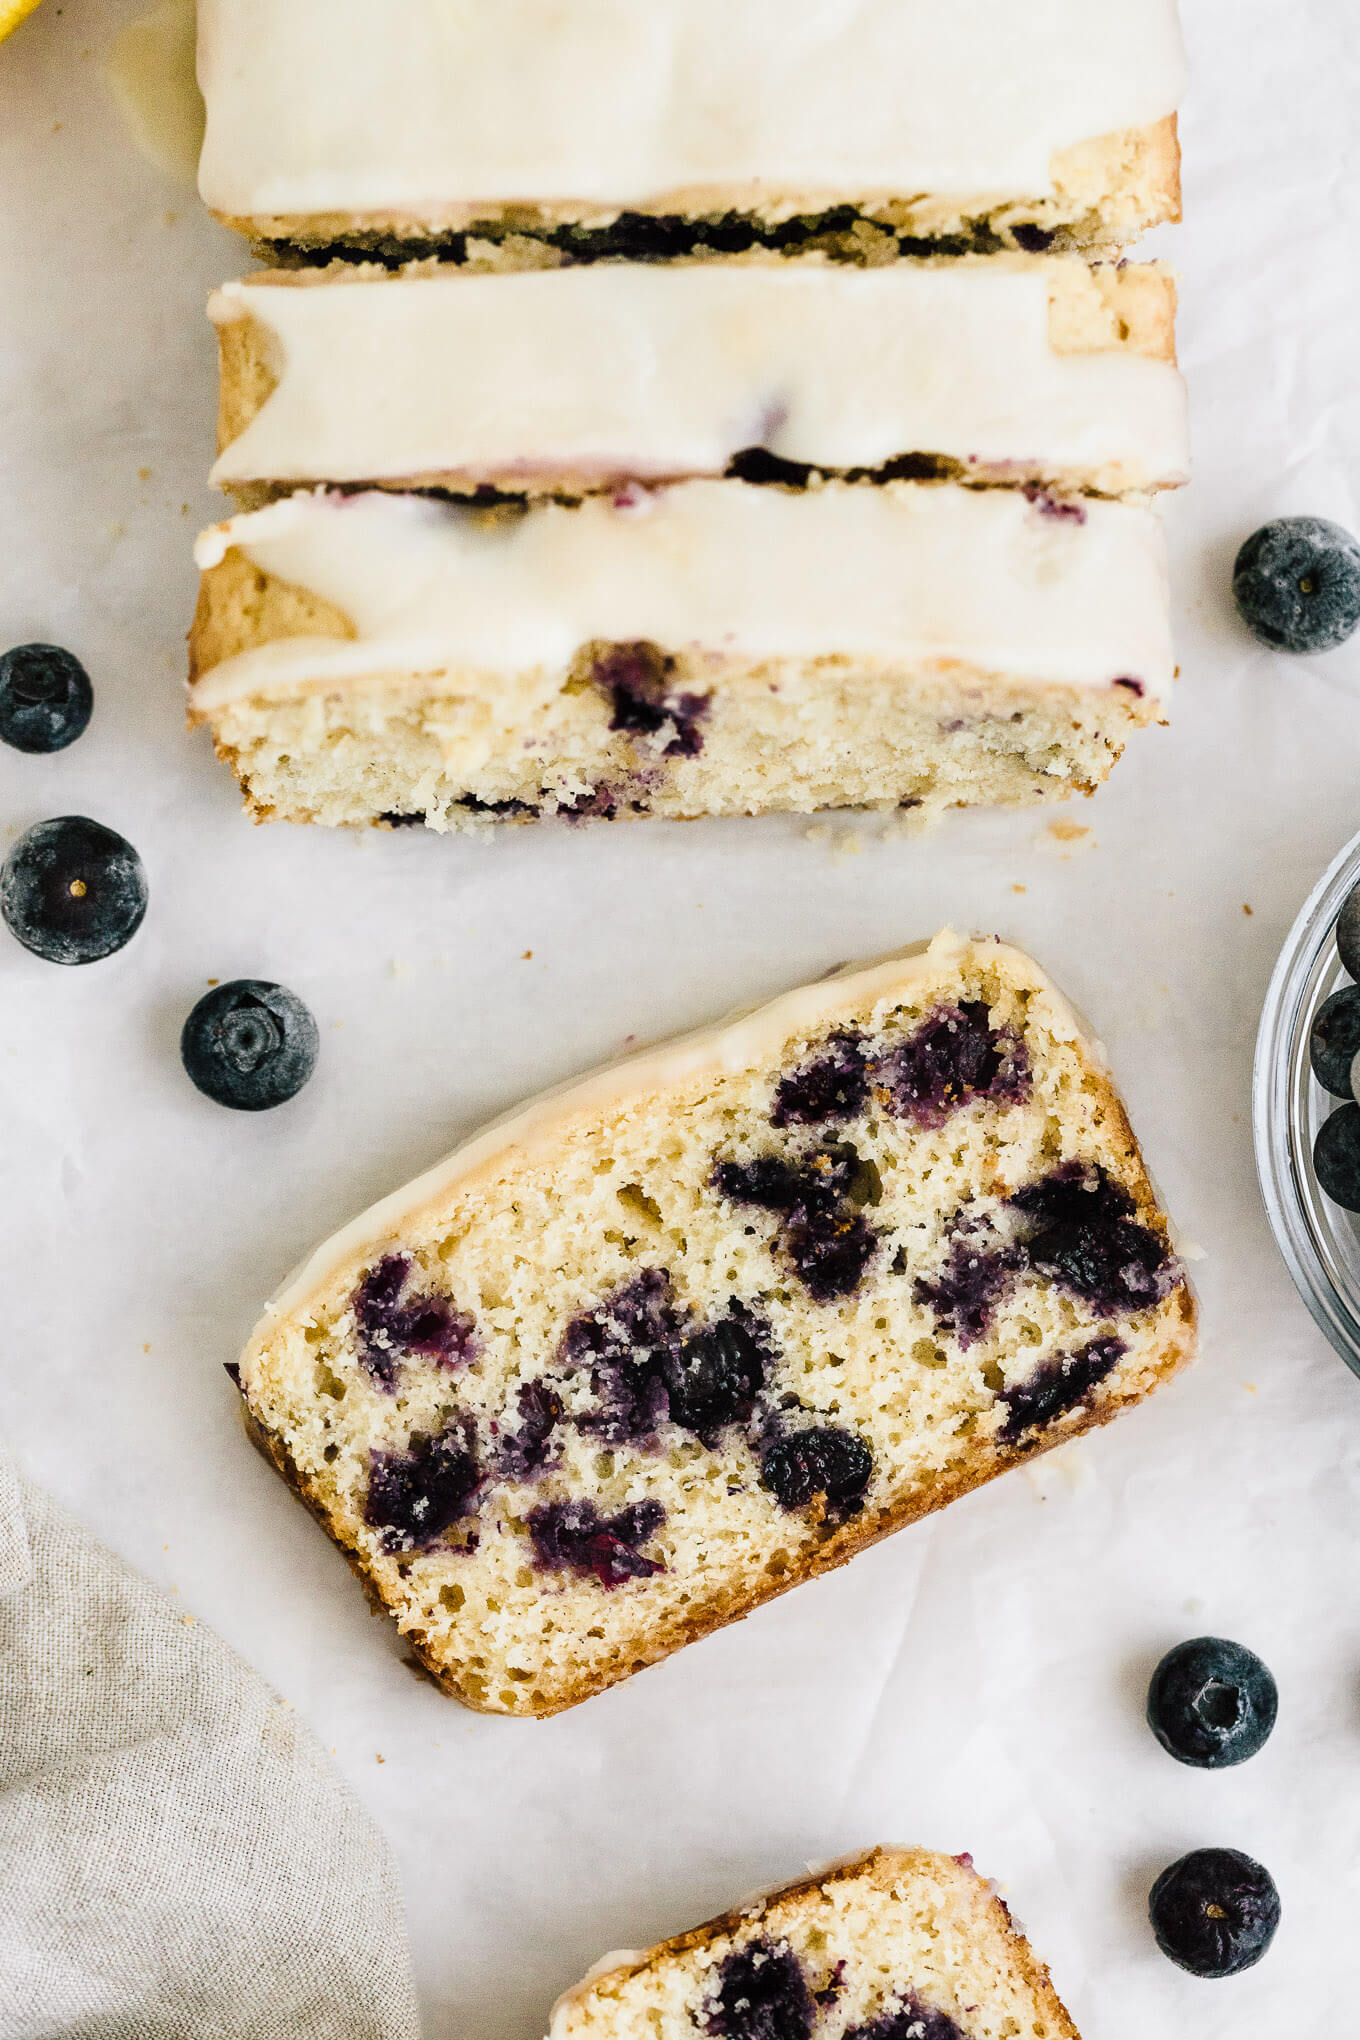 Healthy lemon blueberry bread naturally sweetened with maple syrup and topped with a sweet lemon glaze slice